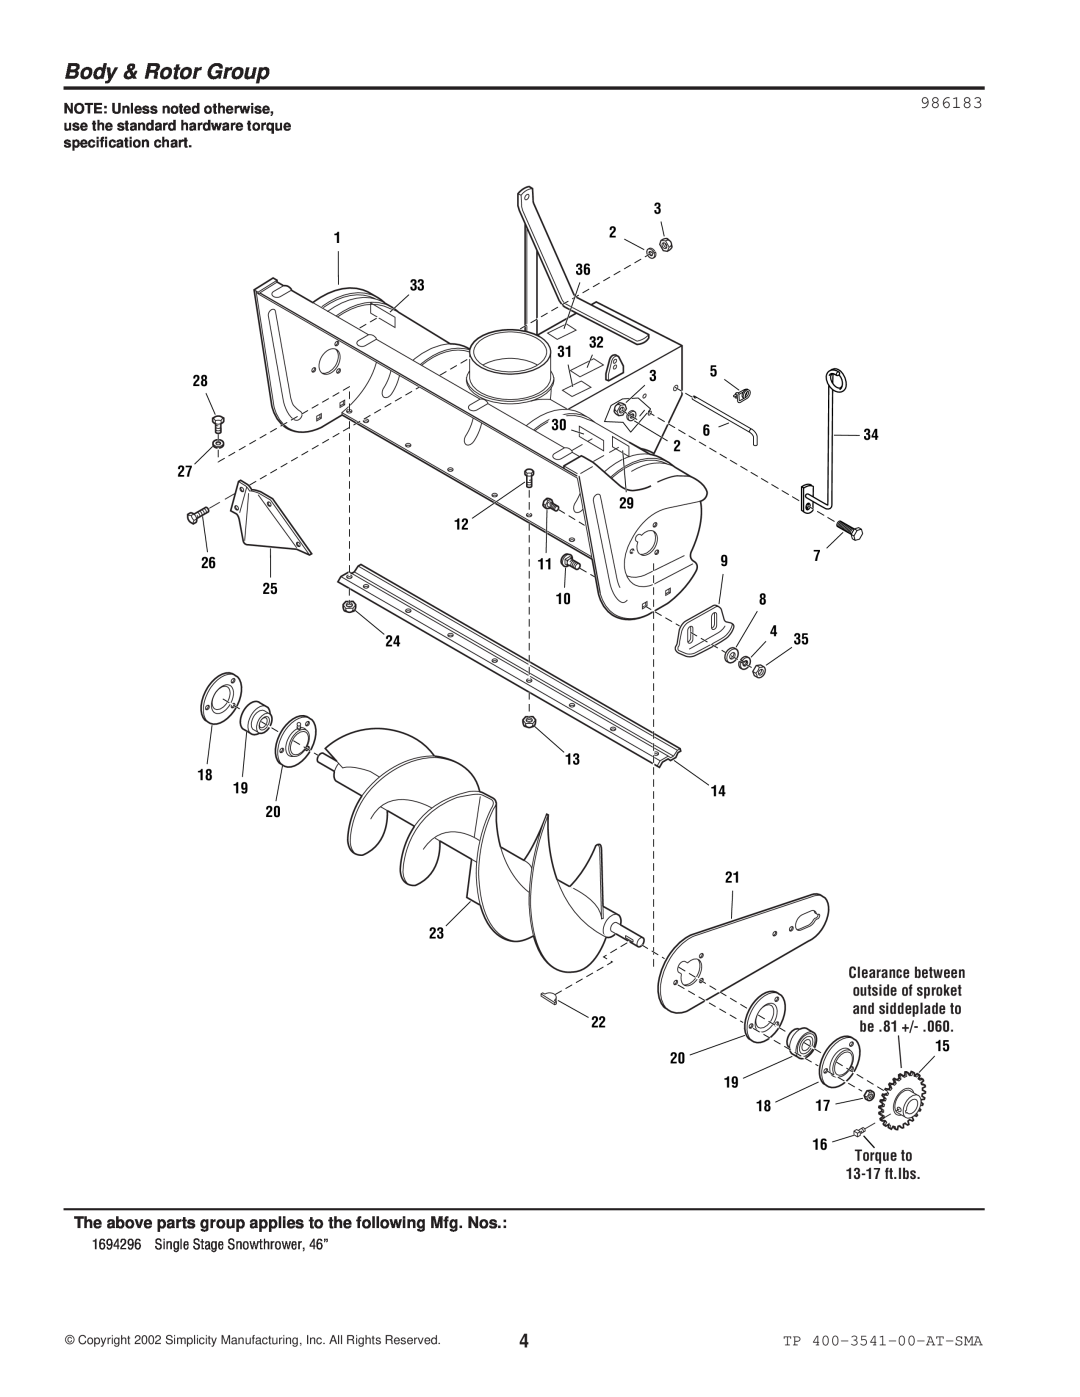 Simplicity 1694296 manual Body & Rotor Group, 986183, The above parts group applies to the following Mfg. Nos, be .81 + 